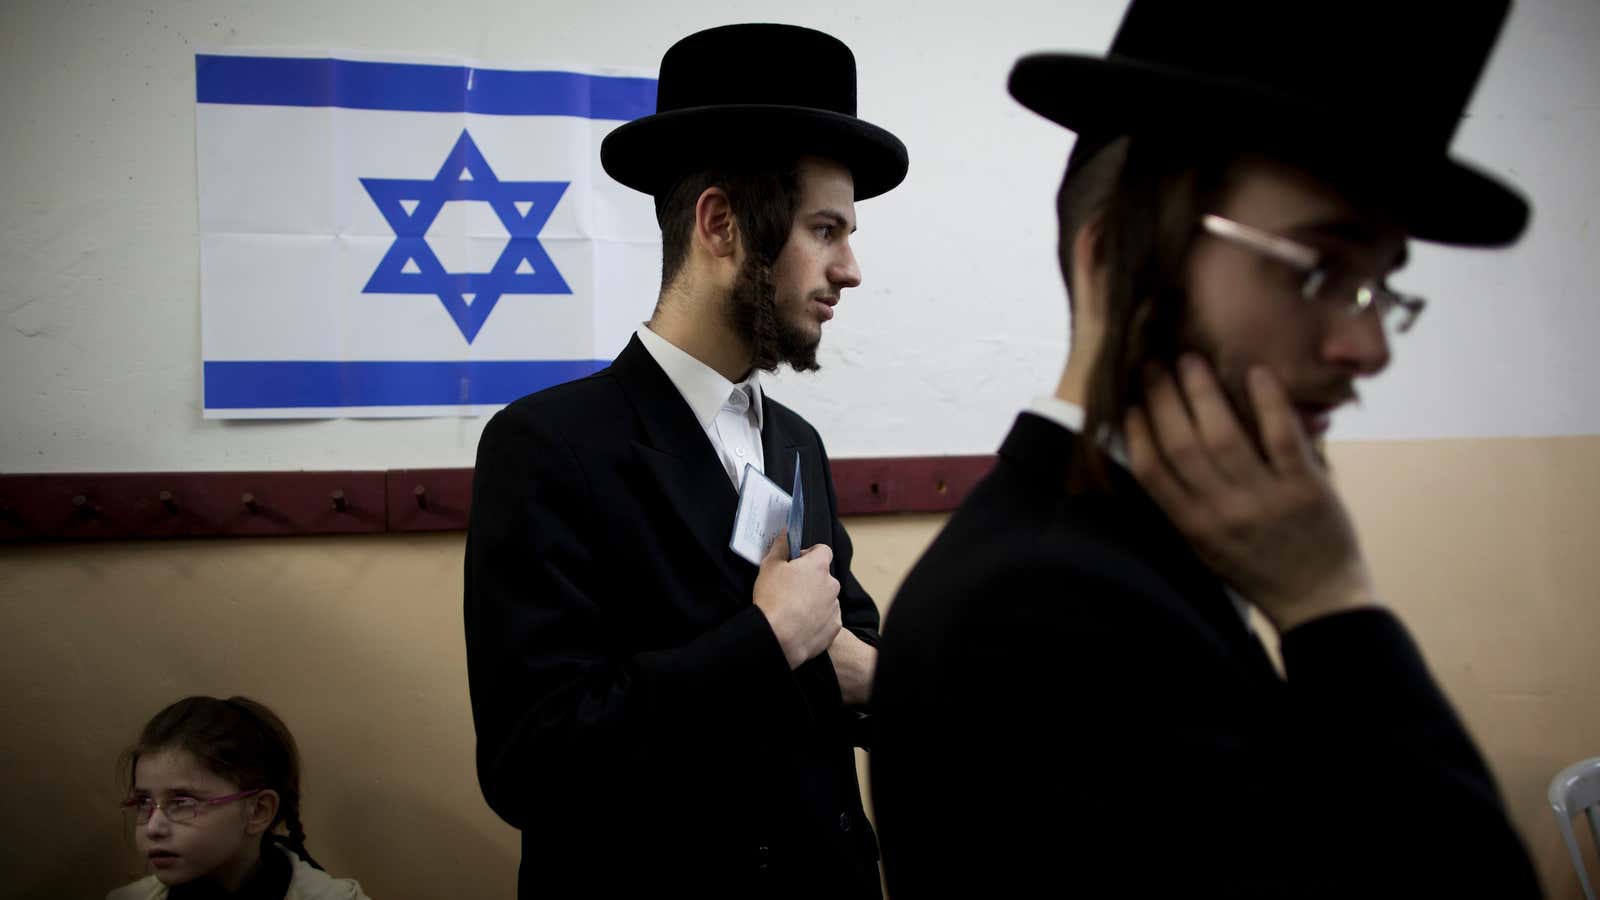 Ultra-orthodox Israeli Jews voting in today’s poll. But will their parties get into the government?